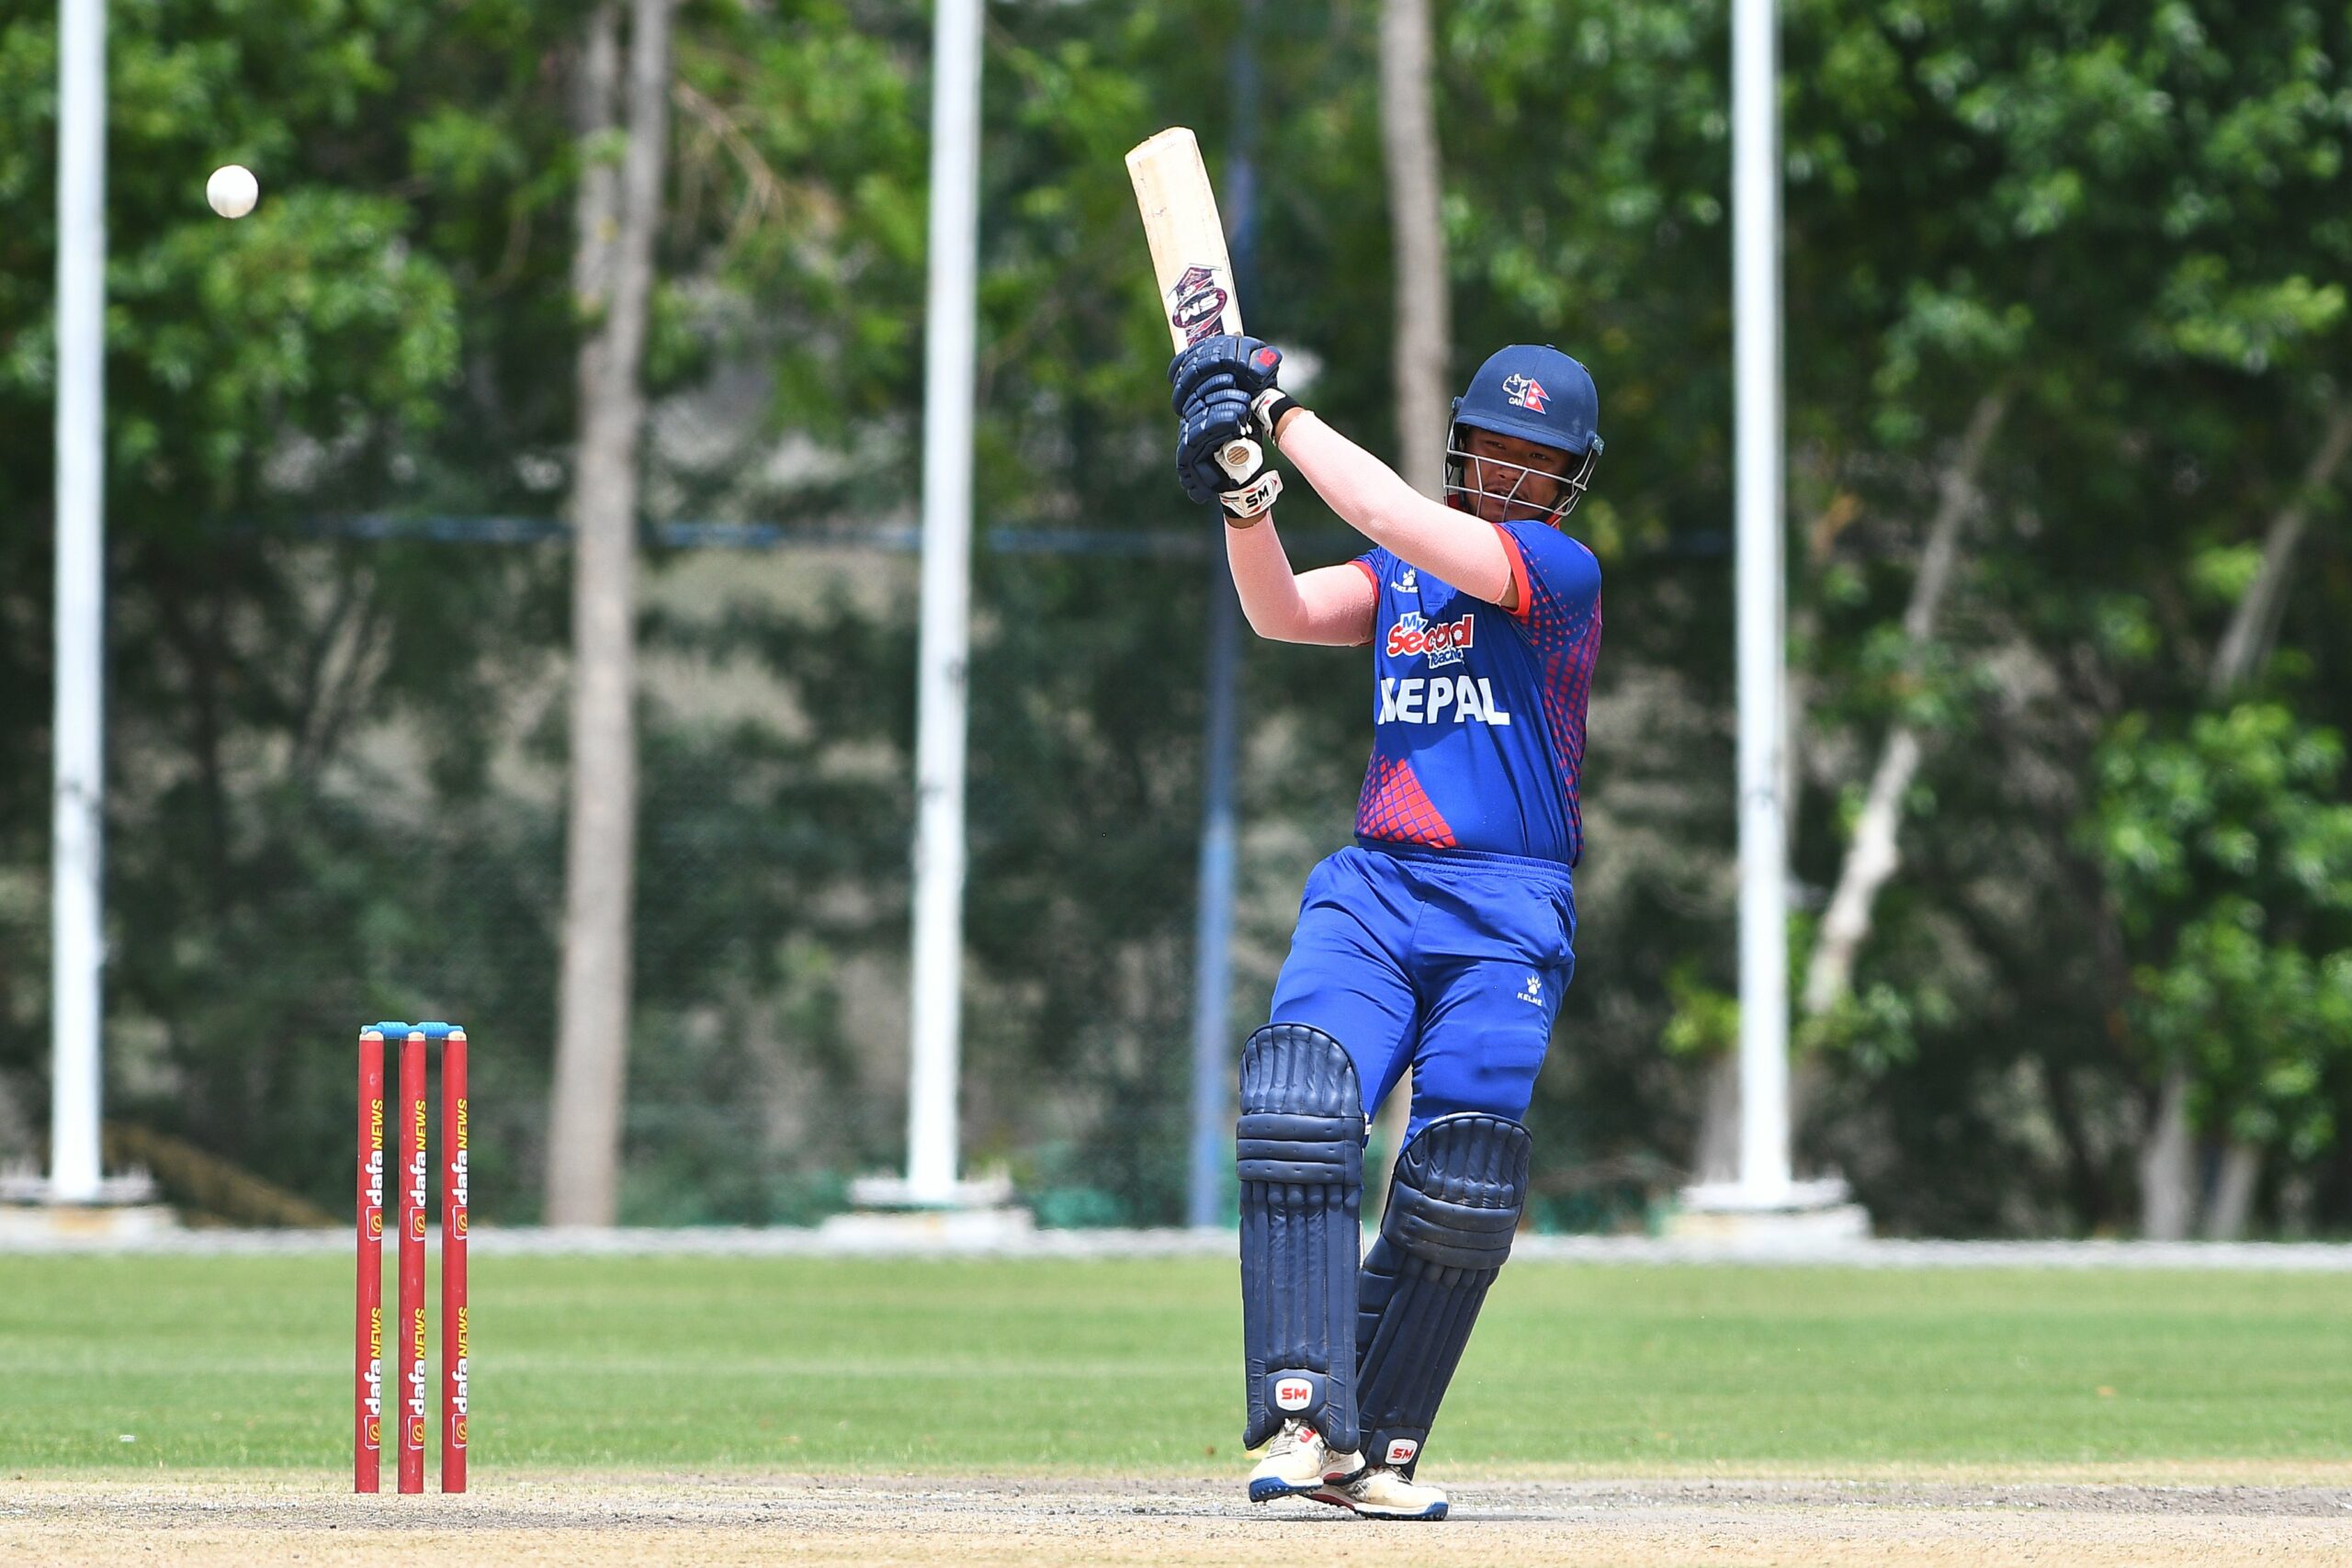 Nepal sets target of 140 runs for Hong Kong in ACC Premier Cup